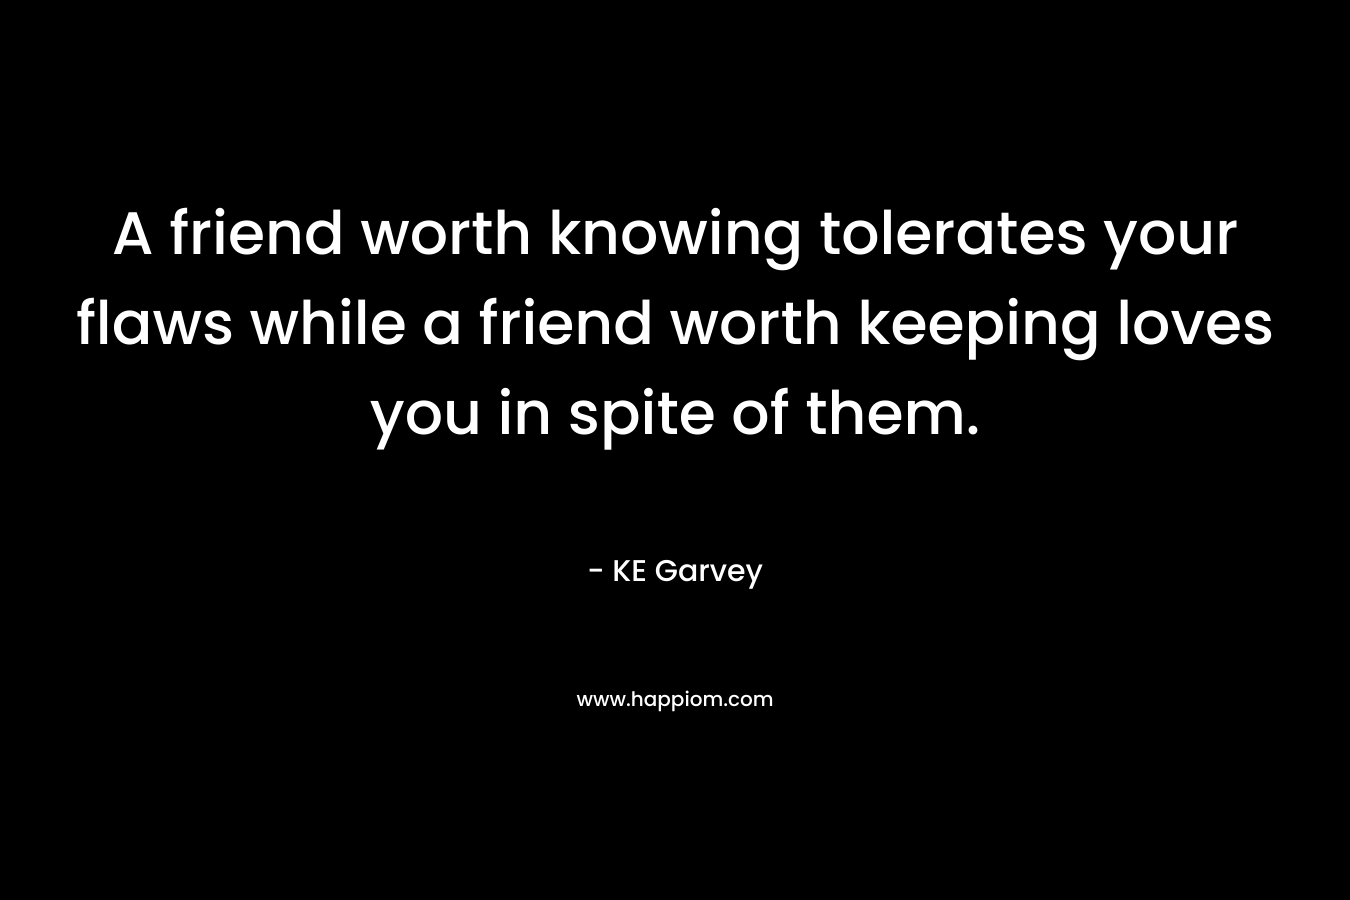 A friend worth knowing tolerates your flaws while a friend worth keeping loves you in spite of them.